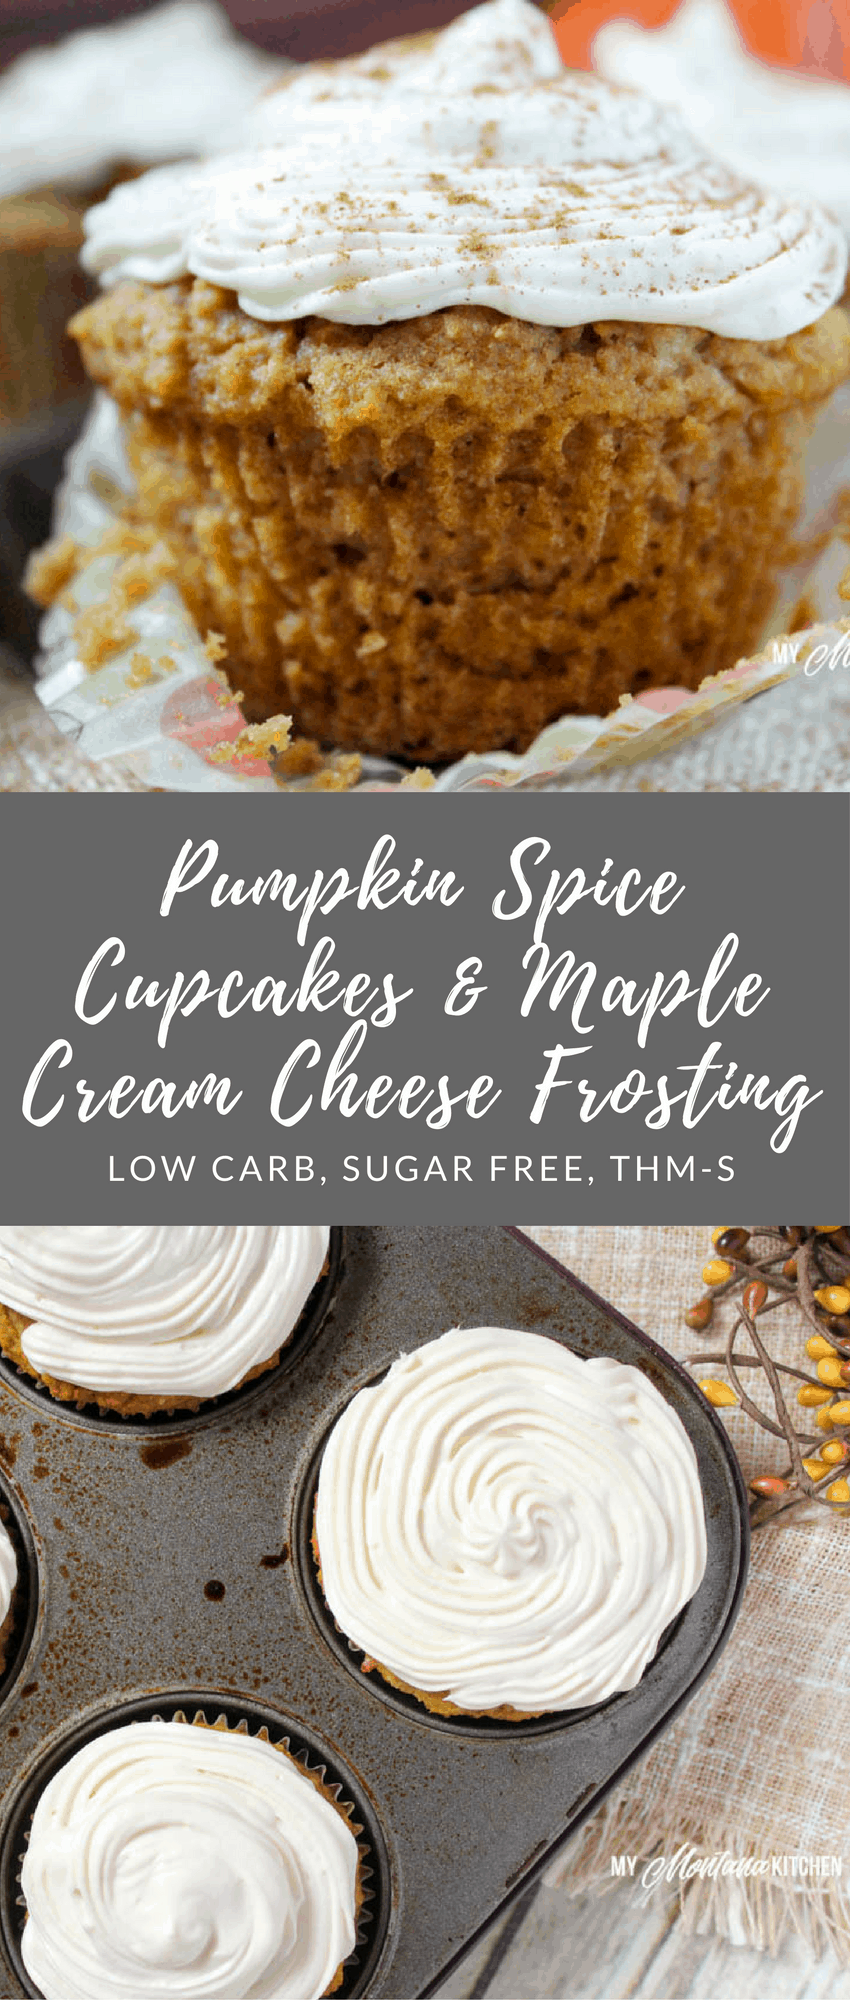 Pumpkin Spice Cupcakes with Maple Cream Cheese Frosting (Low Carb, Sugar Free, THM-S) #trimhealthymama #thms #thm #pumpkinspice #maple #lowcarb #sugarfree #glutenfree